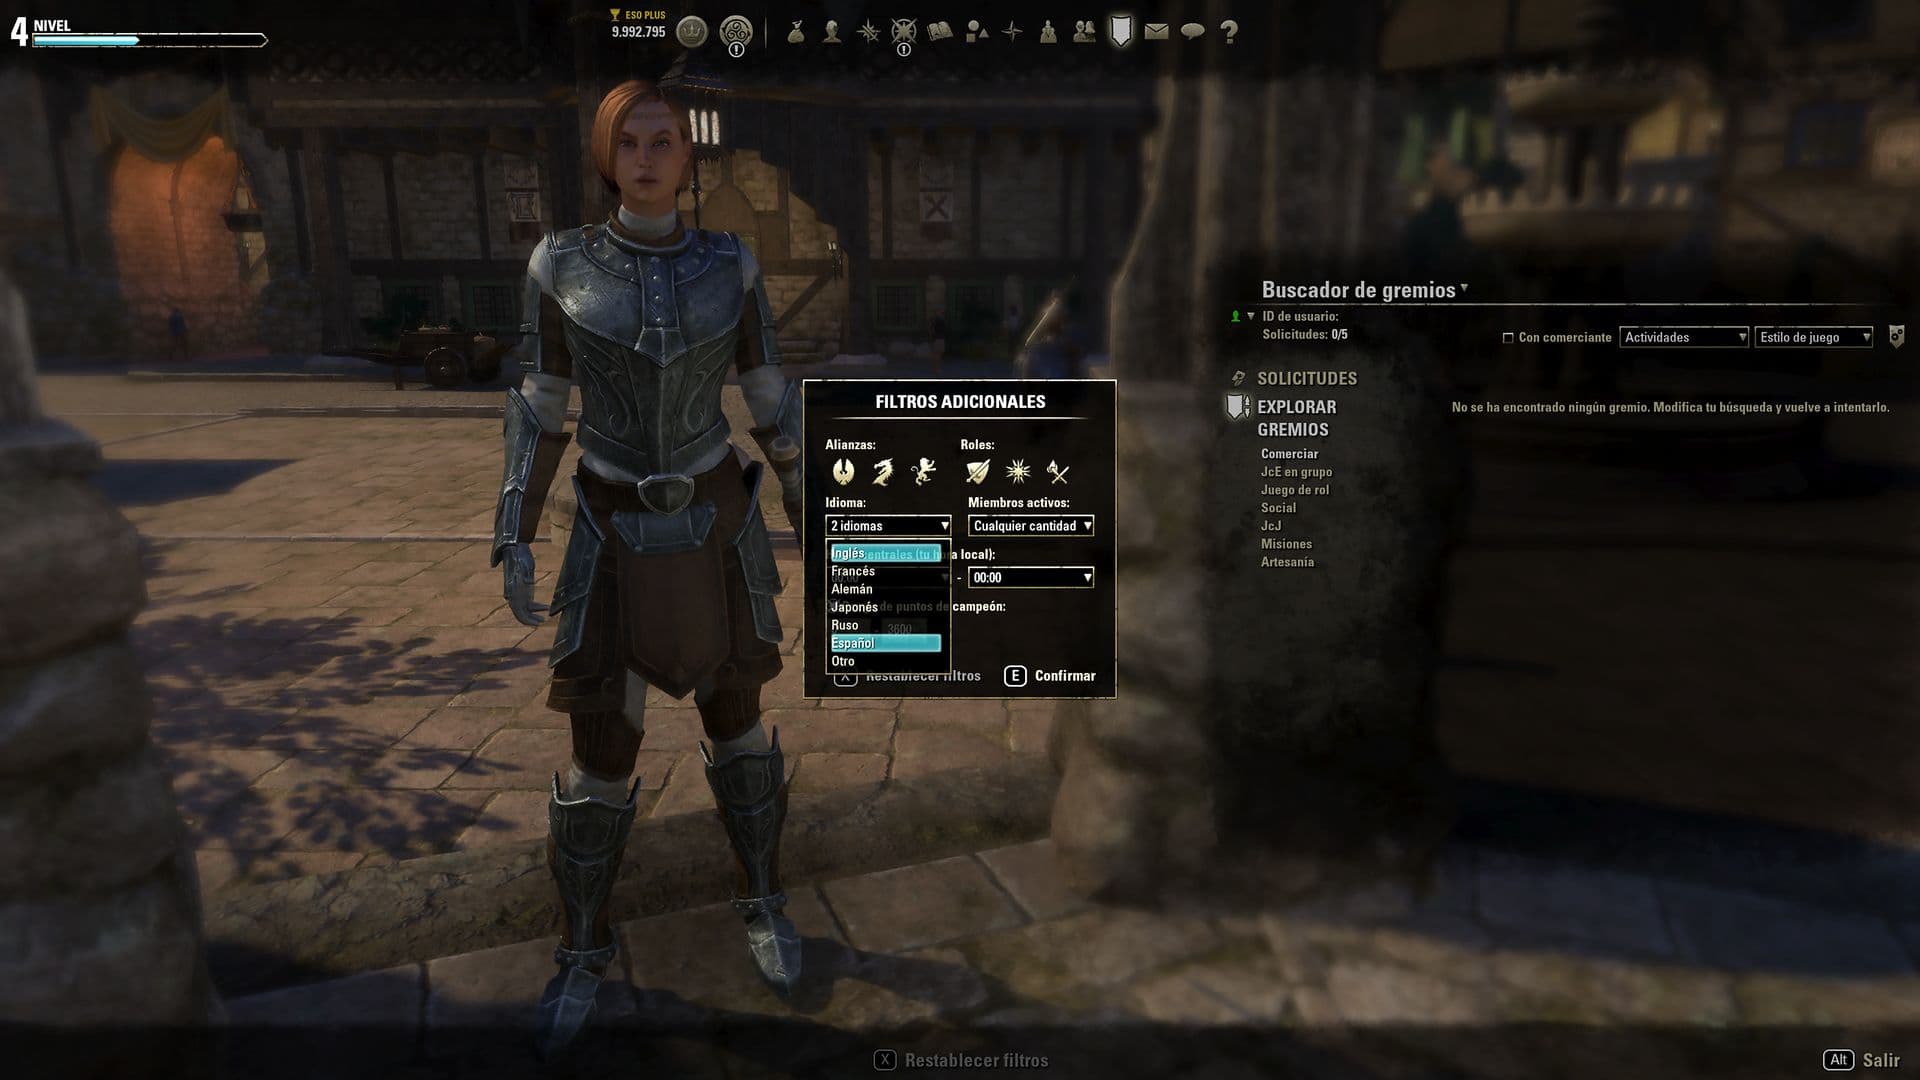 The Elder Scrolls Online Reveals Update 39 Details--and Puts it on the  PC/Mac PTS Today